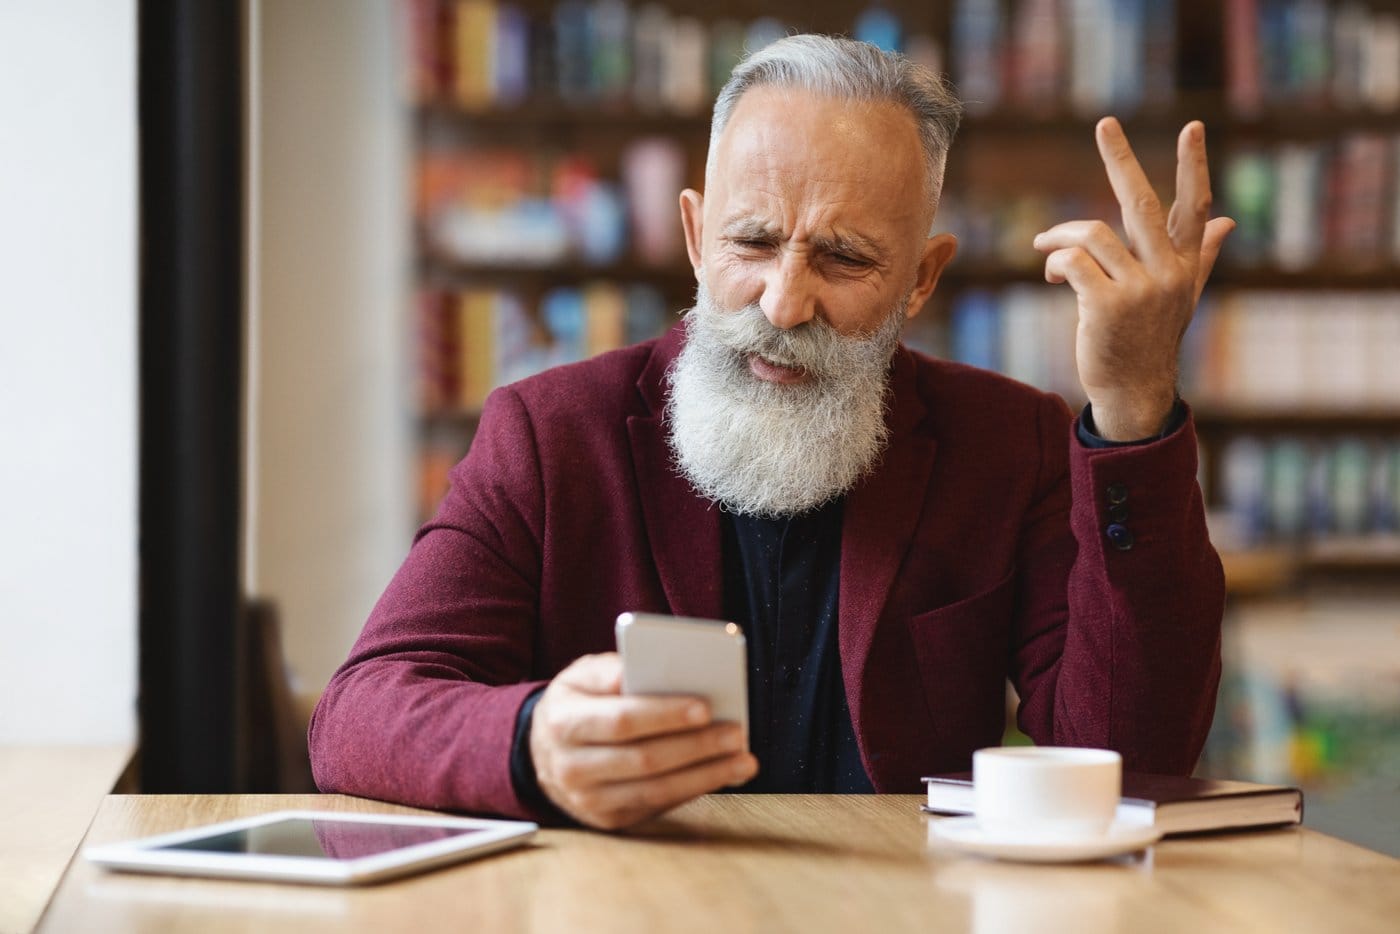 Angry man using mobile phone at cafe